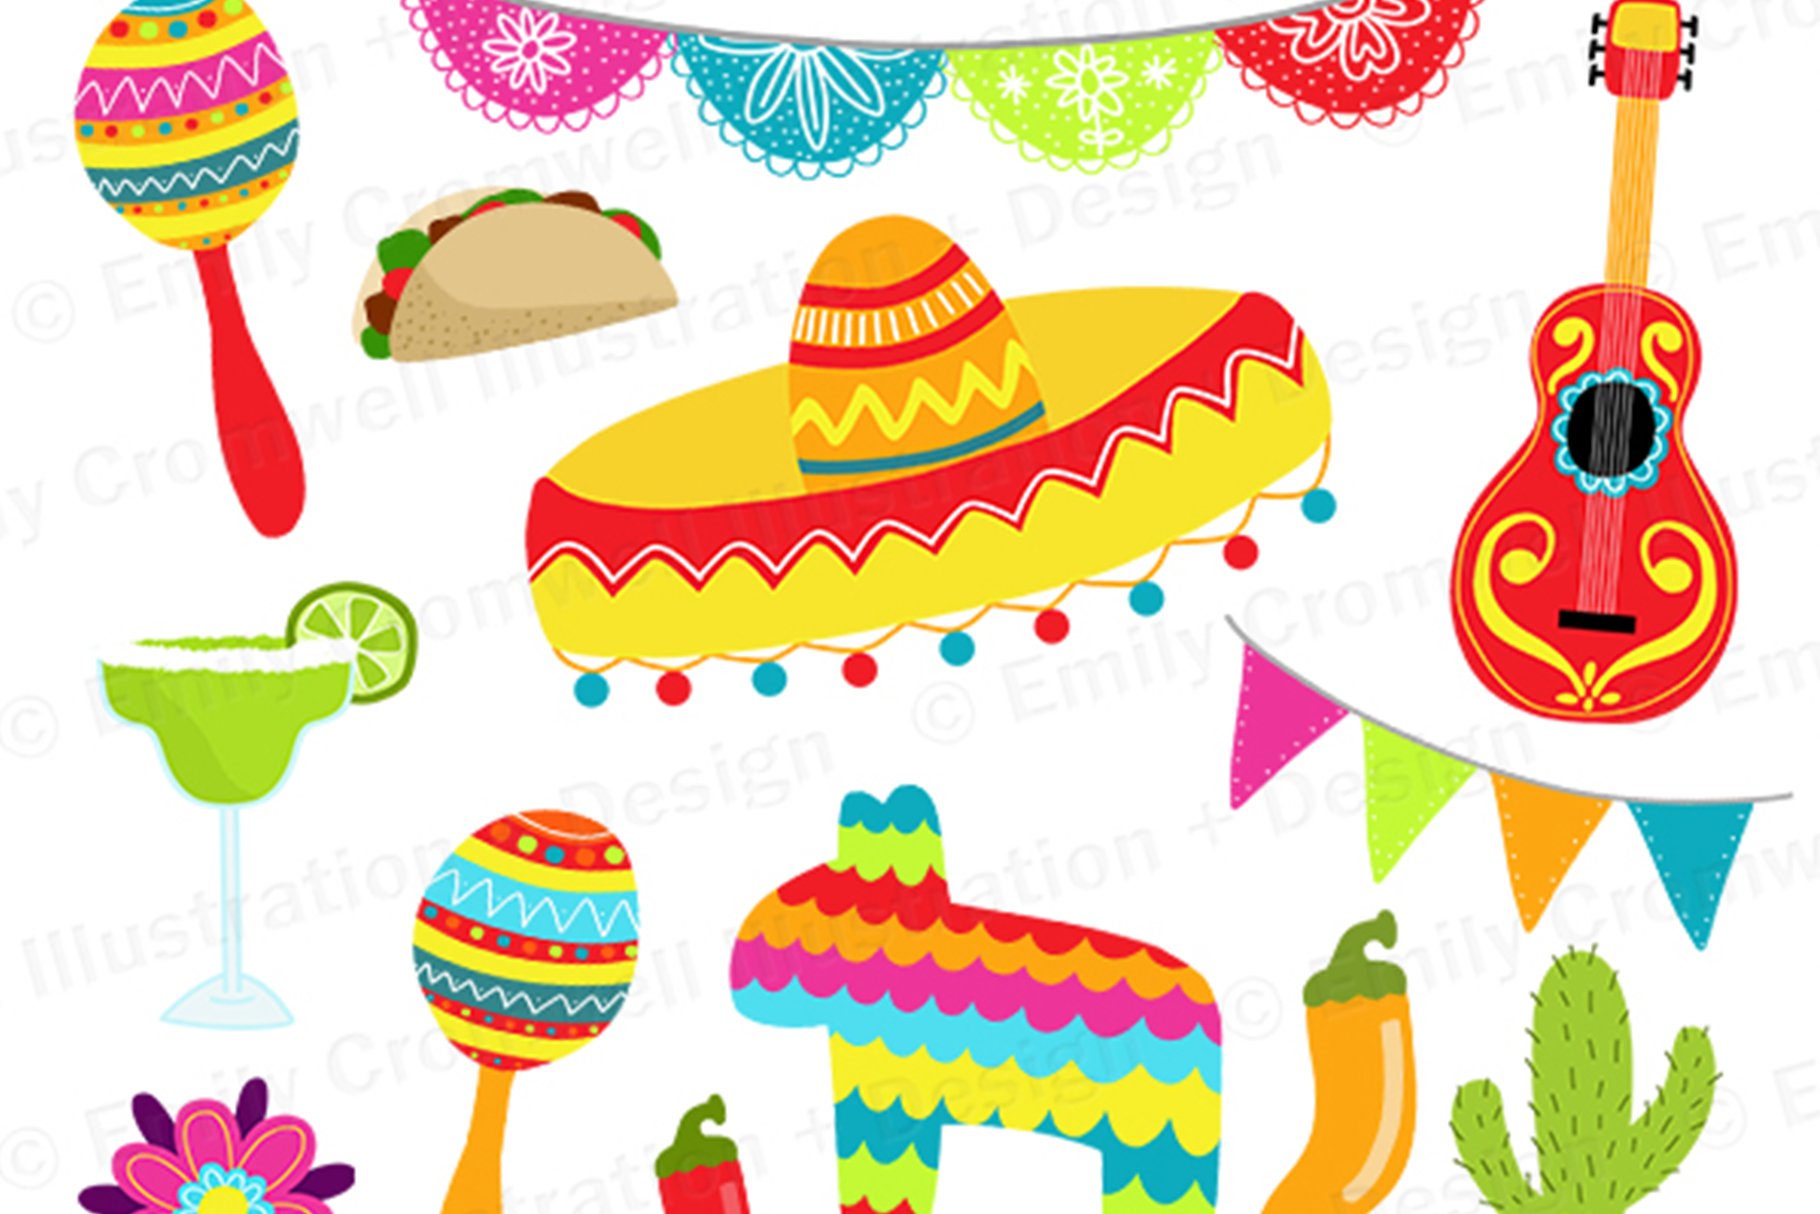 Multicolor Mexican elements to create Fiesta illustrations.